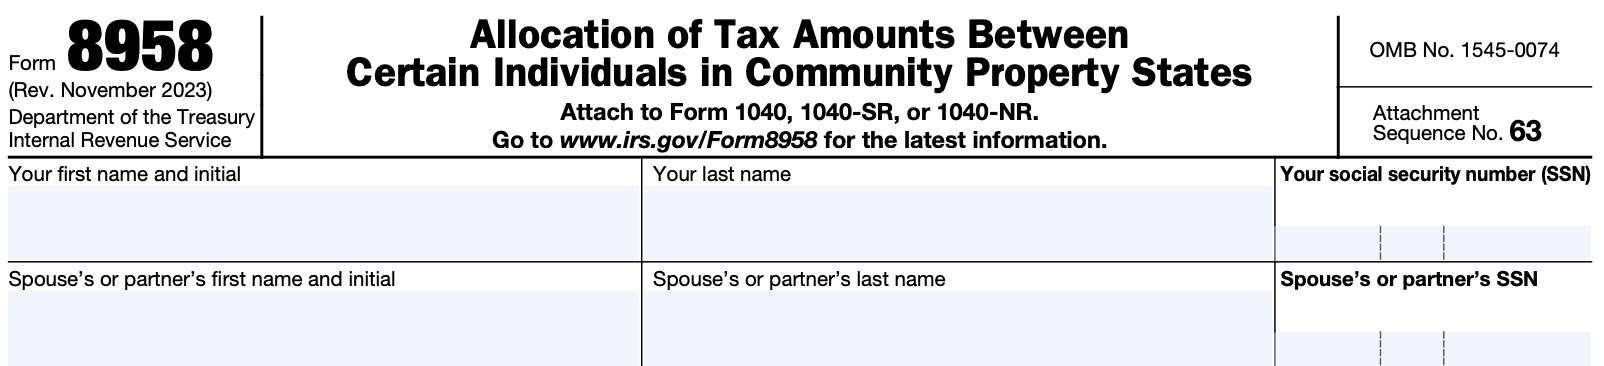 irs form 8958, taxpayer information